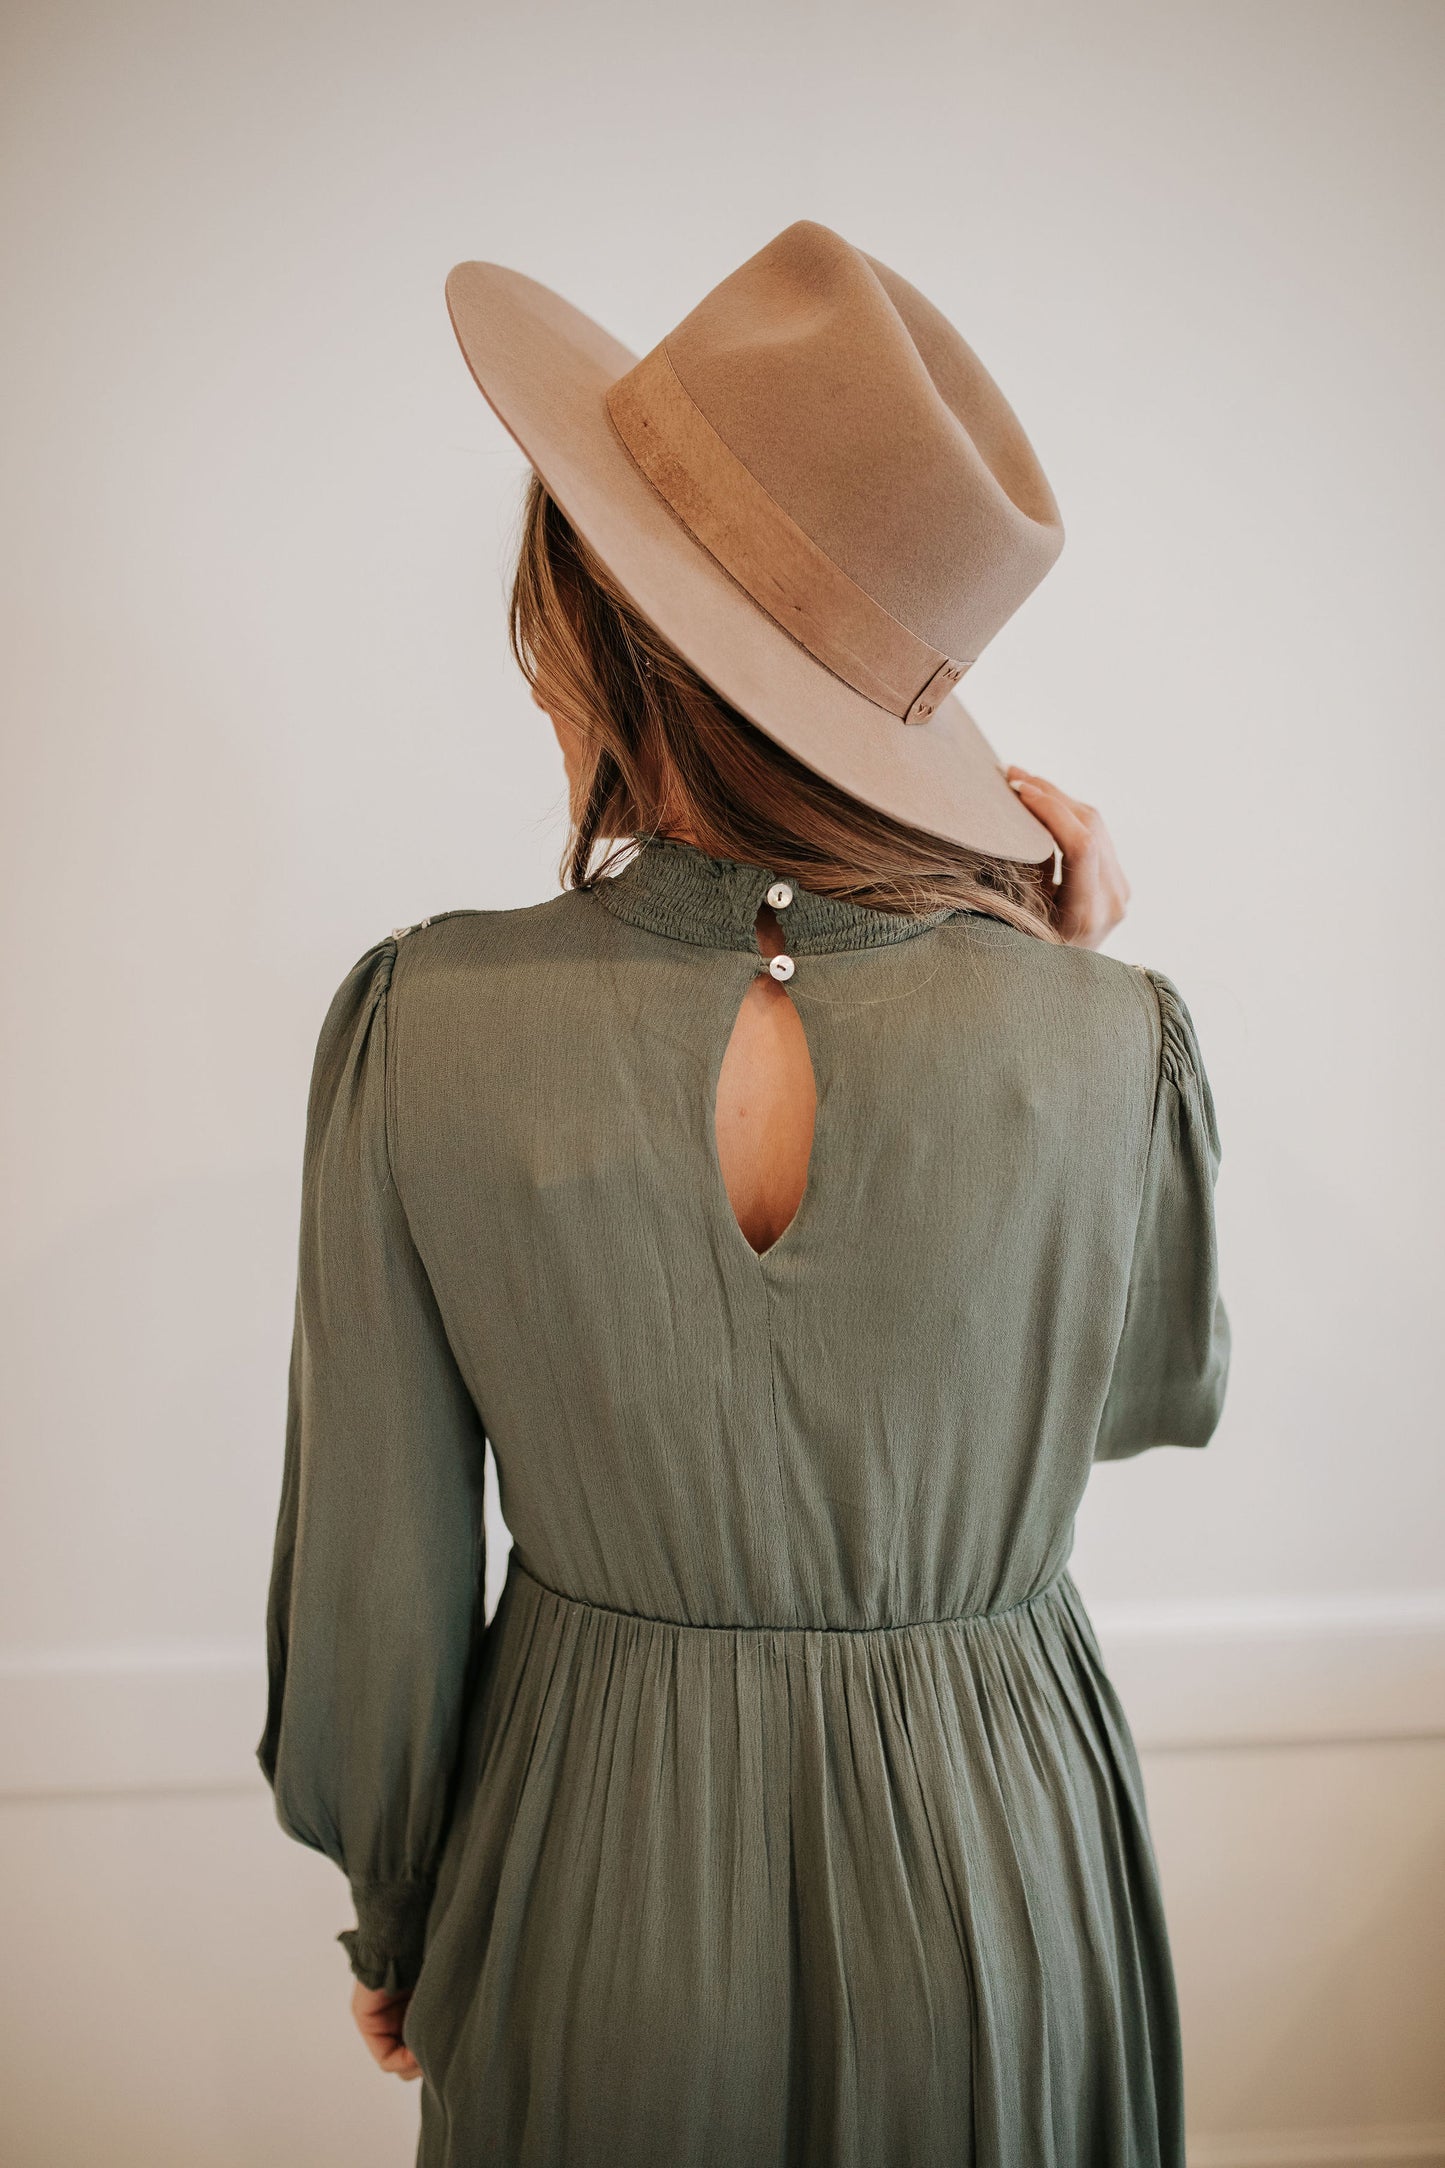 THE DIANA EMBROIDERED MIDI DRESS IN DUSTY OLIVE